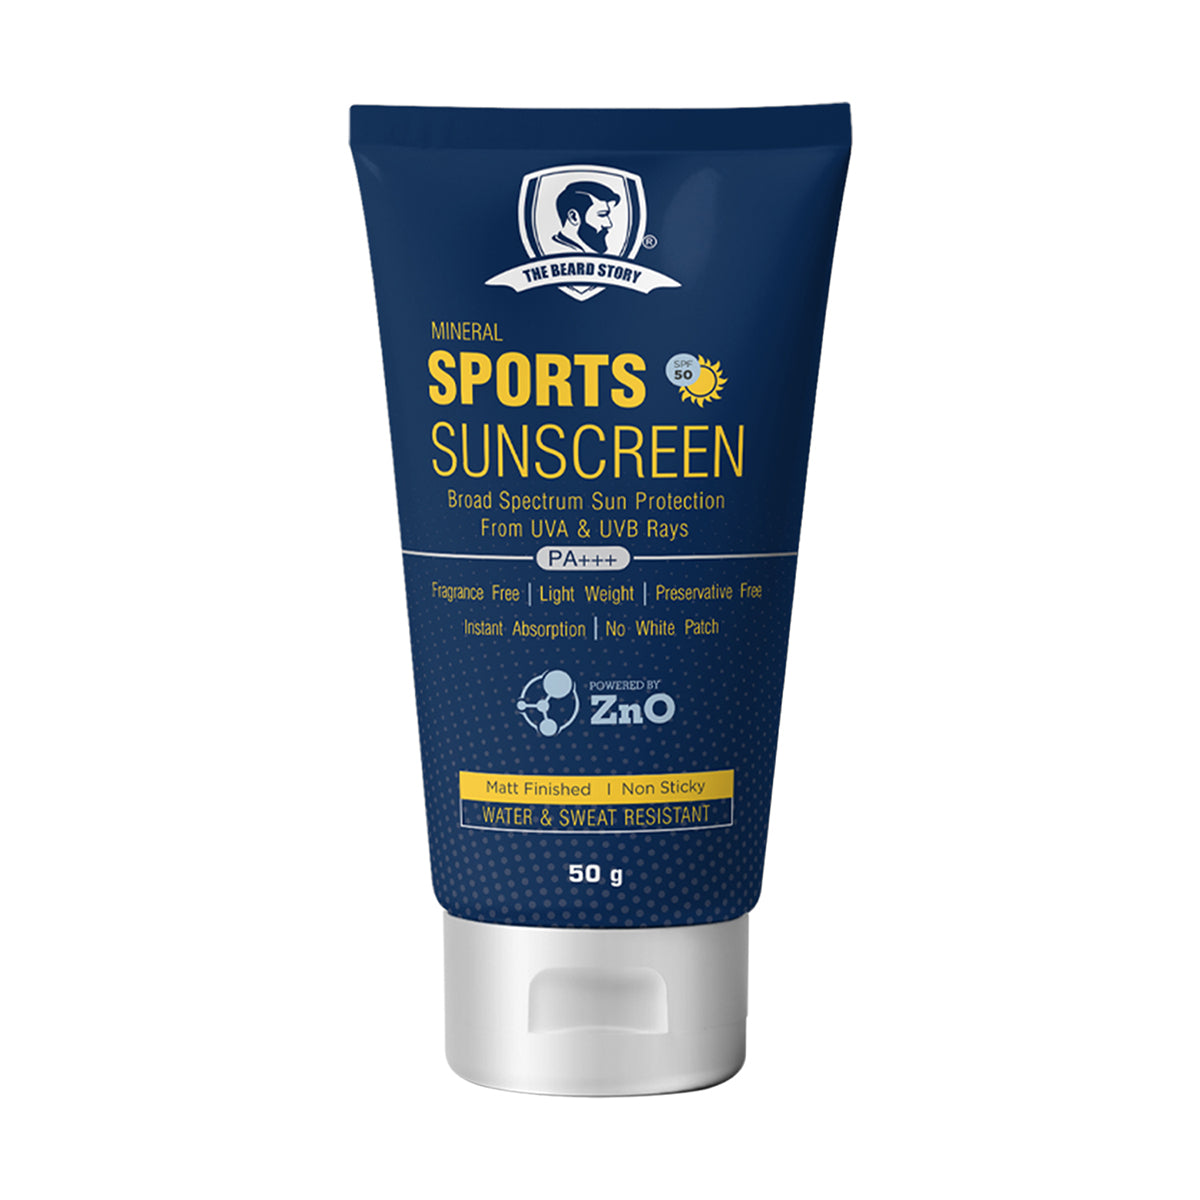 The Beard Story Mineral Sunscreen, SPF 50 | Sports Sunscreen | No White Cast | Enriched with ZnO & TiO2 | 50g